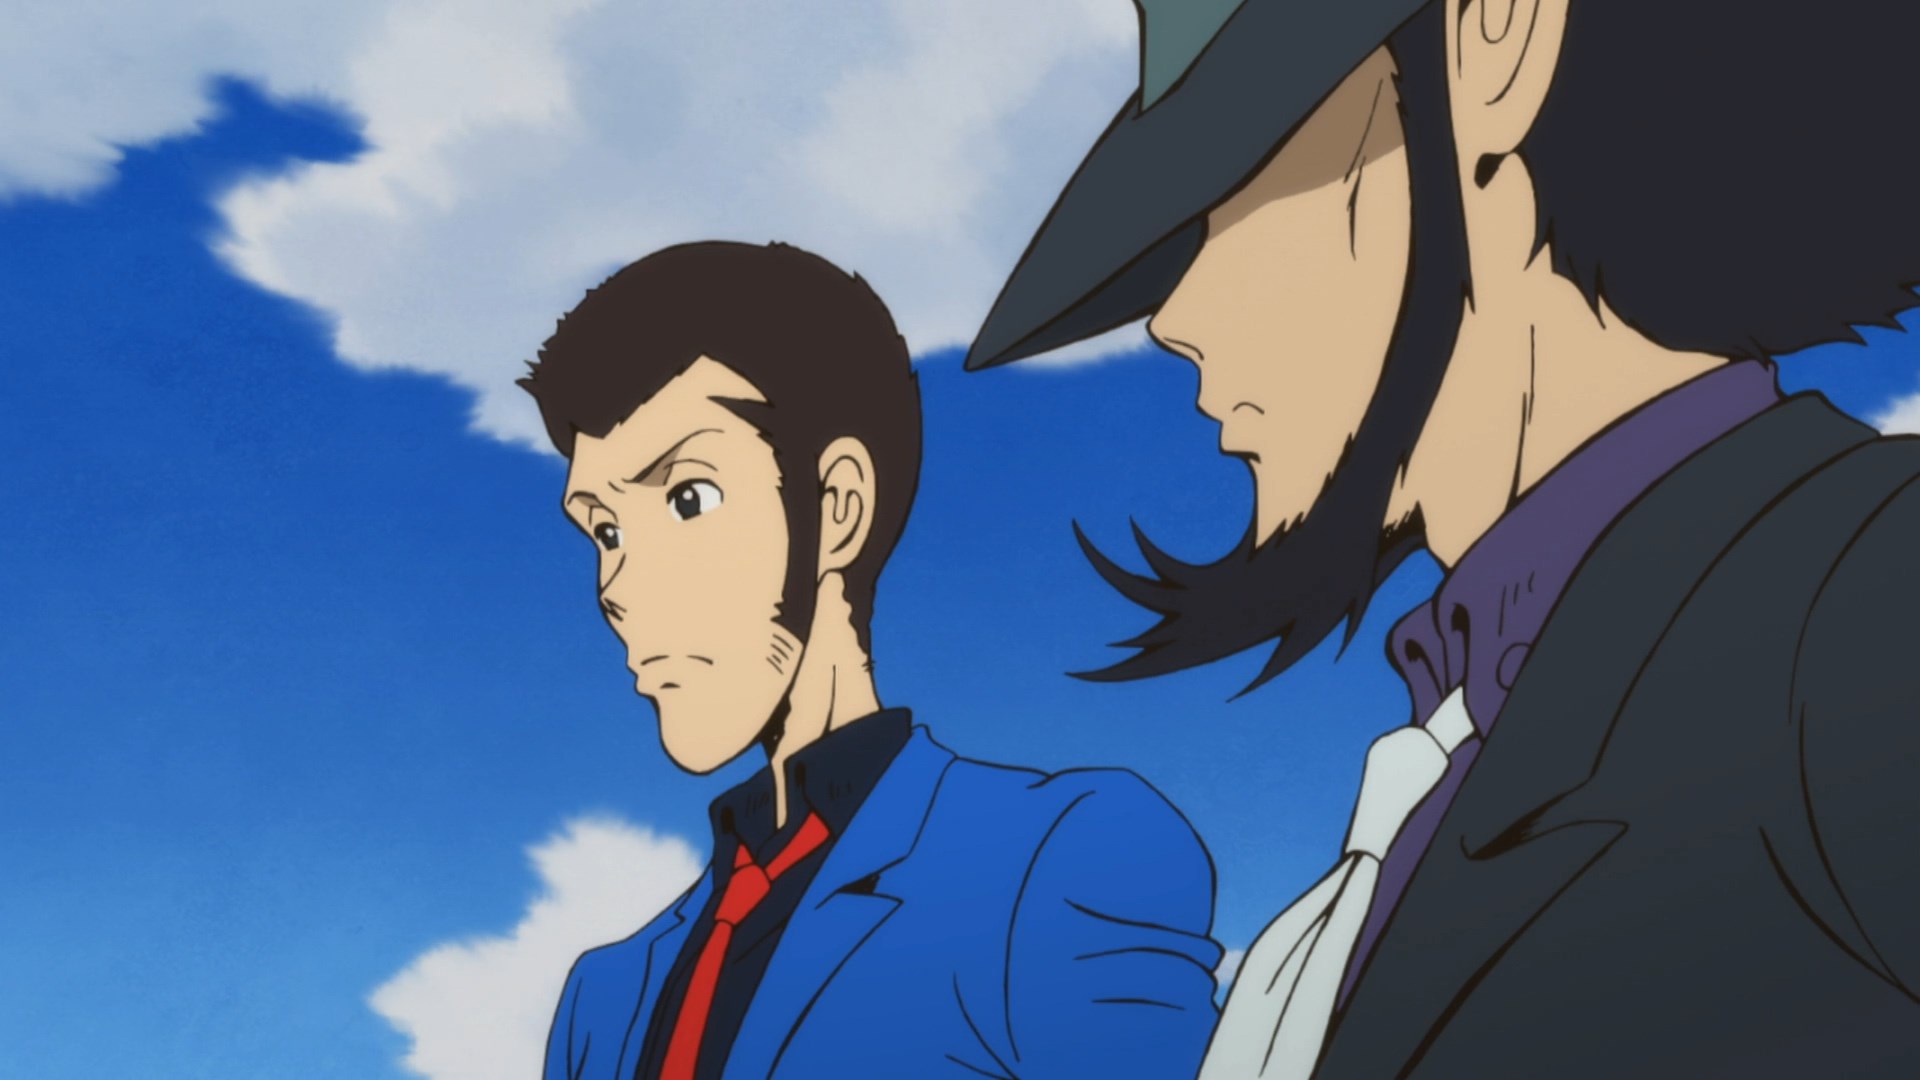 Lupin The Third Part4 08 Review Better Get Another Box Of Tissues Astronerdboy S Anime Manga Blog Astronerdboy S Anime Manga Blog